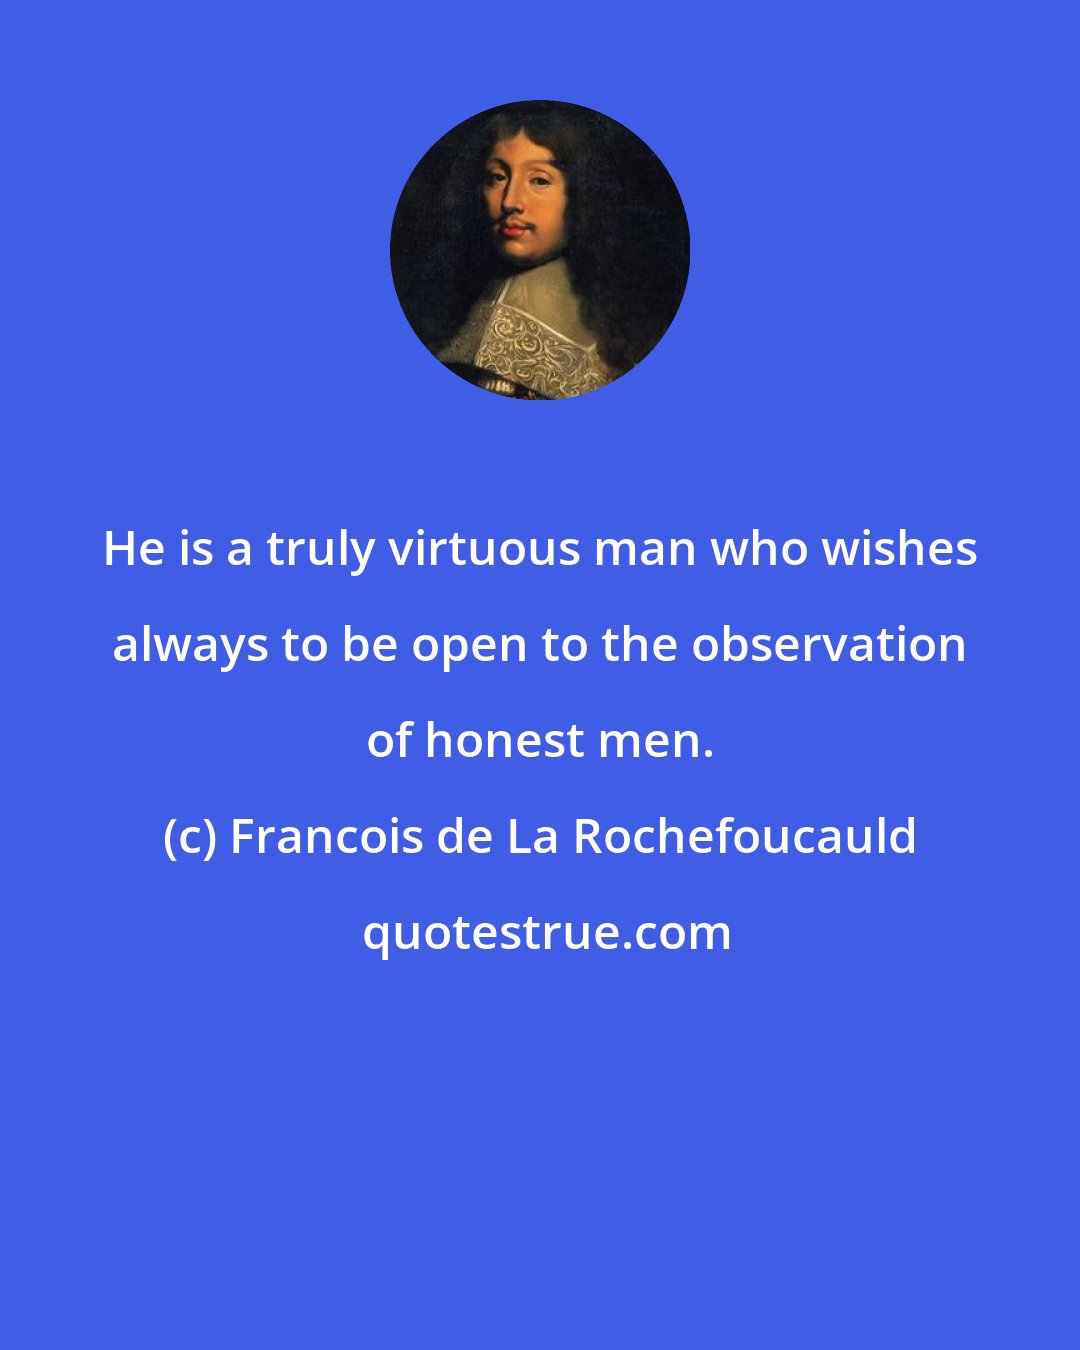 Francois de La Rochefoucauld: He is a truly virtuous man who wishes always to be open to the observation of honest men.